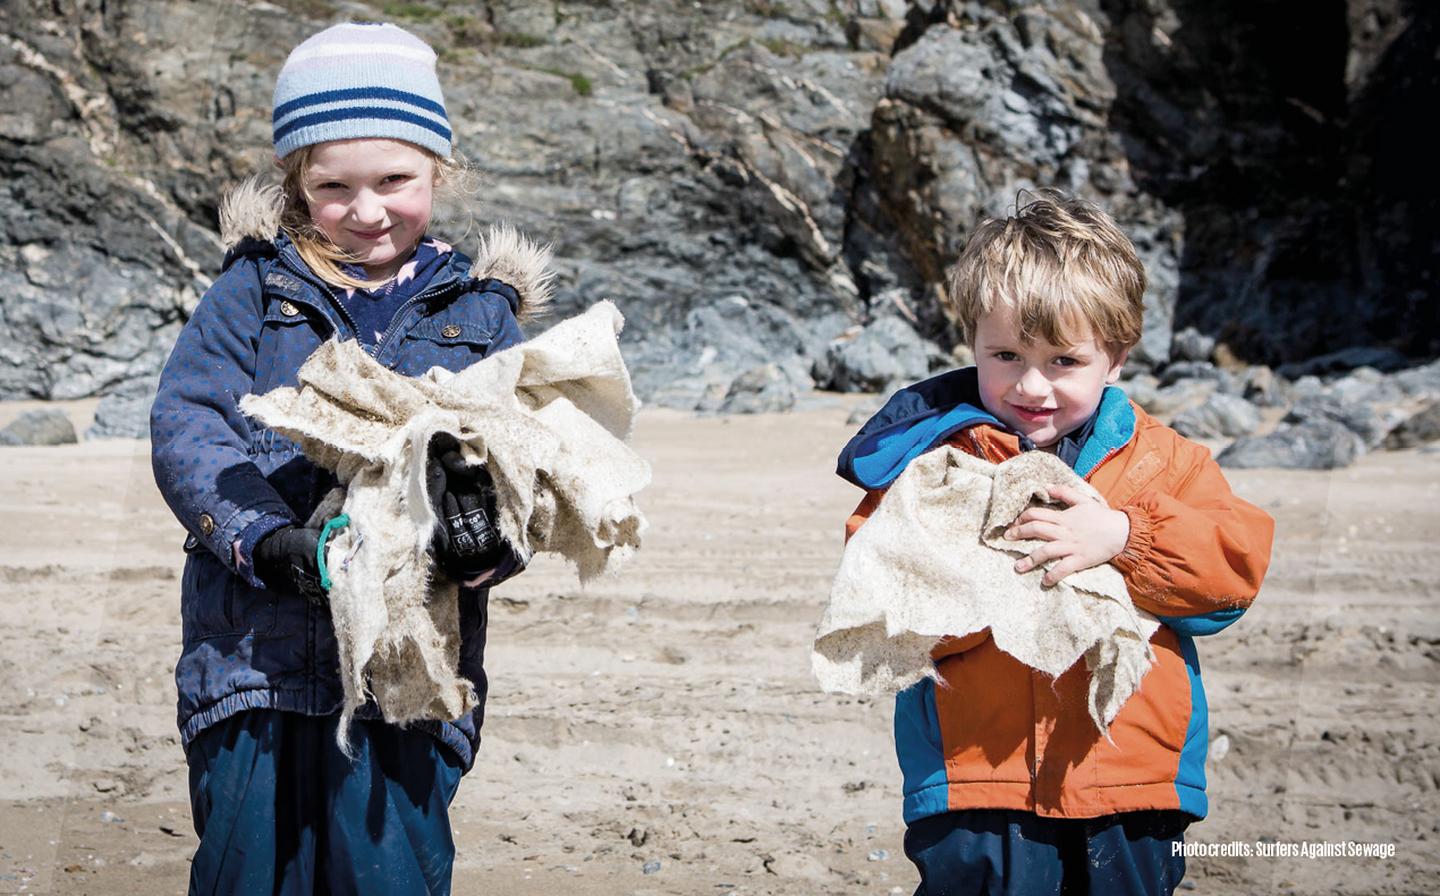 Two young children helping to clear a UK beach of litter